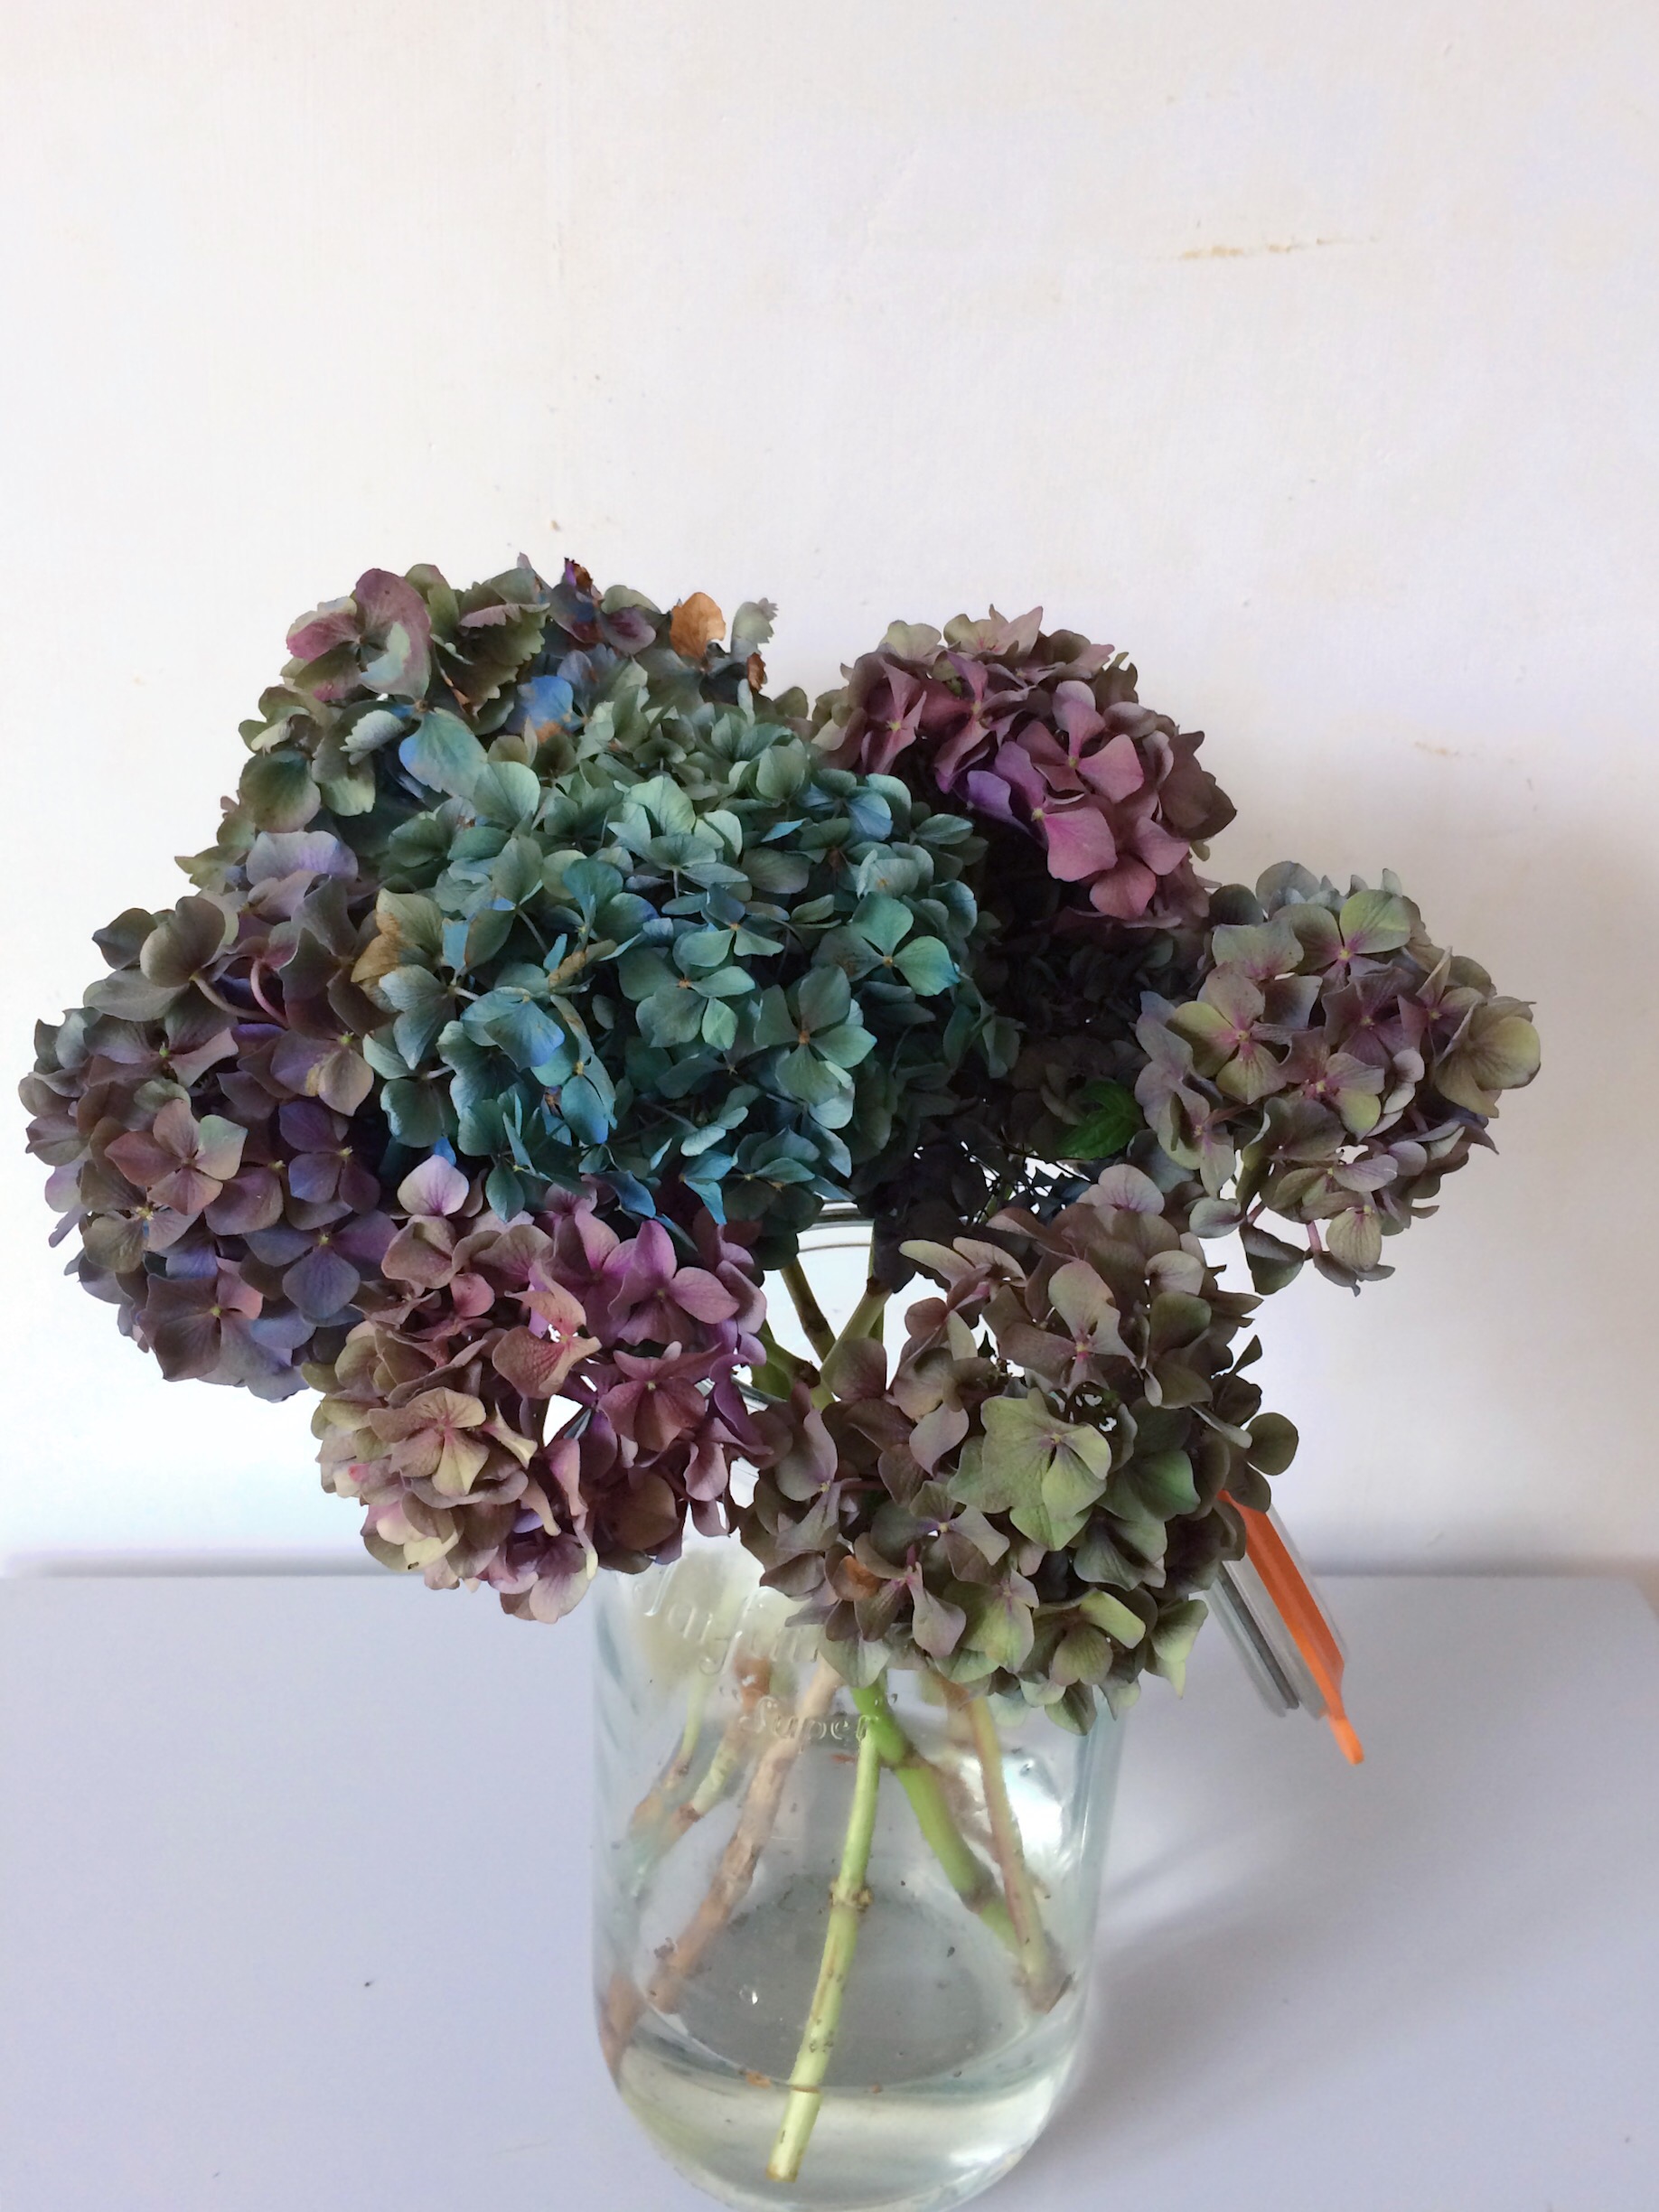 Slow drying hydrangeas in a vase helps lock in the colour